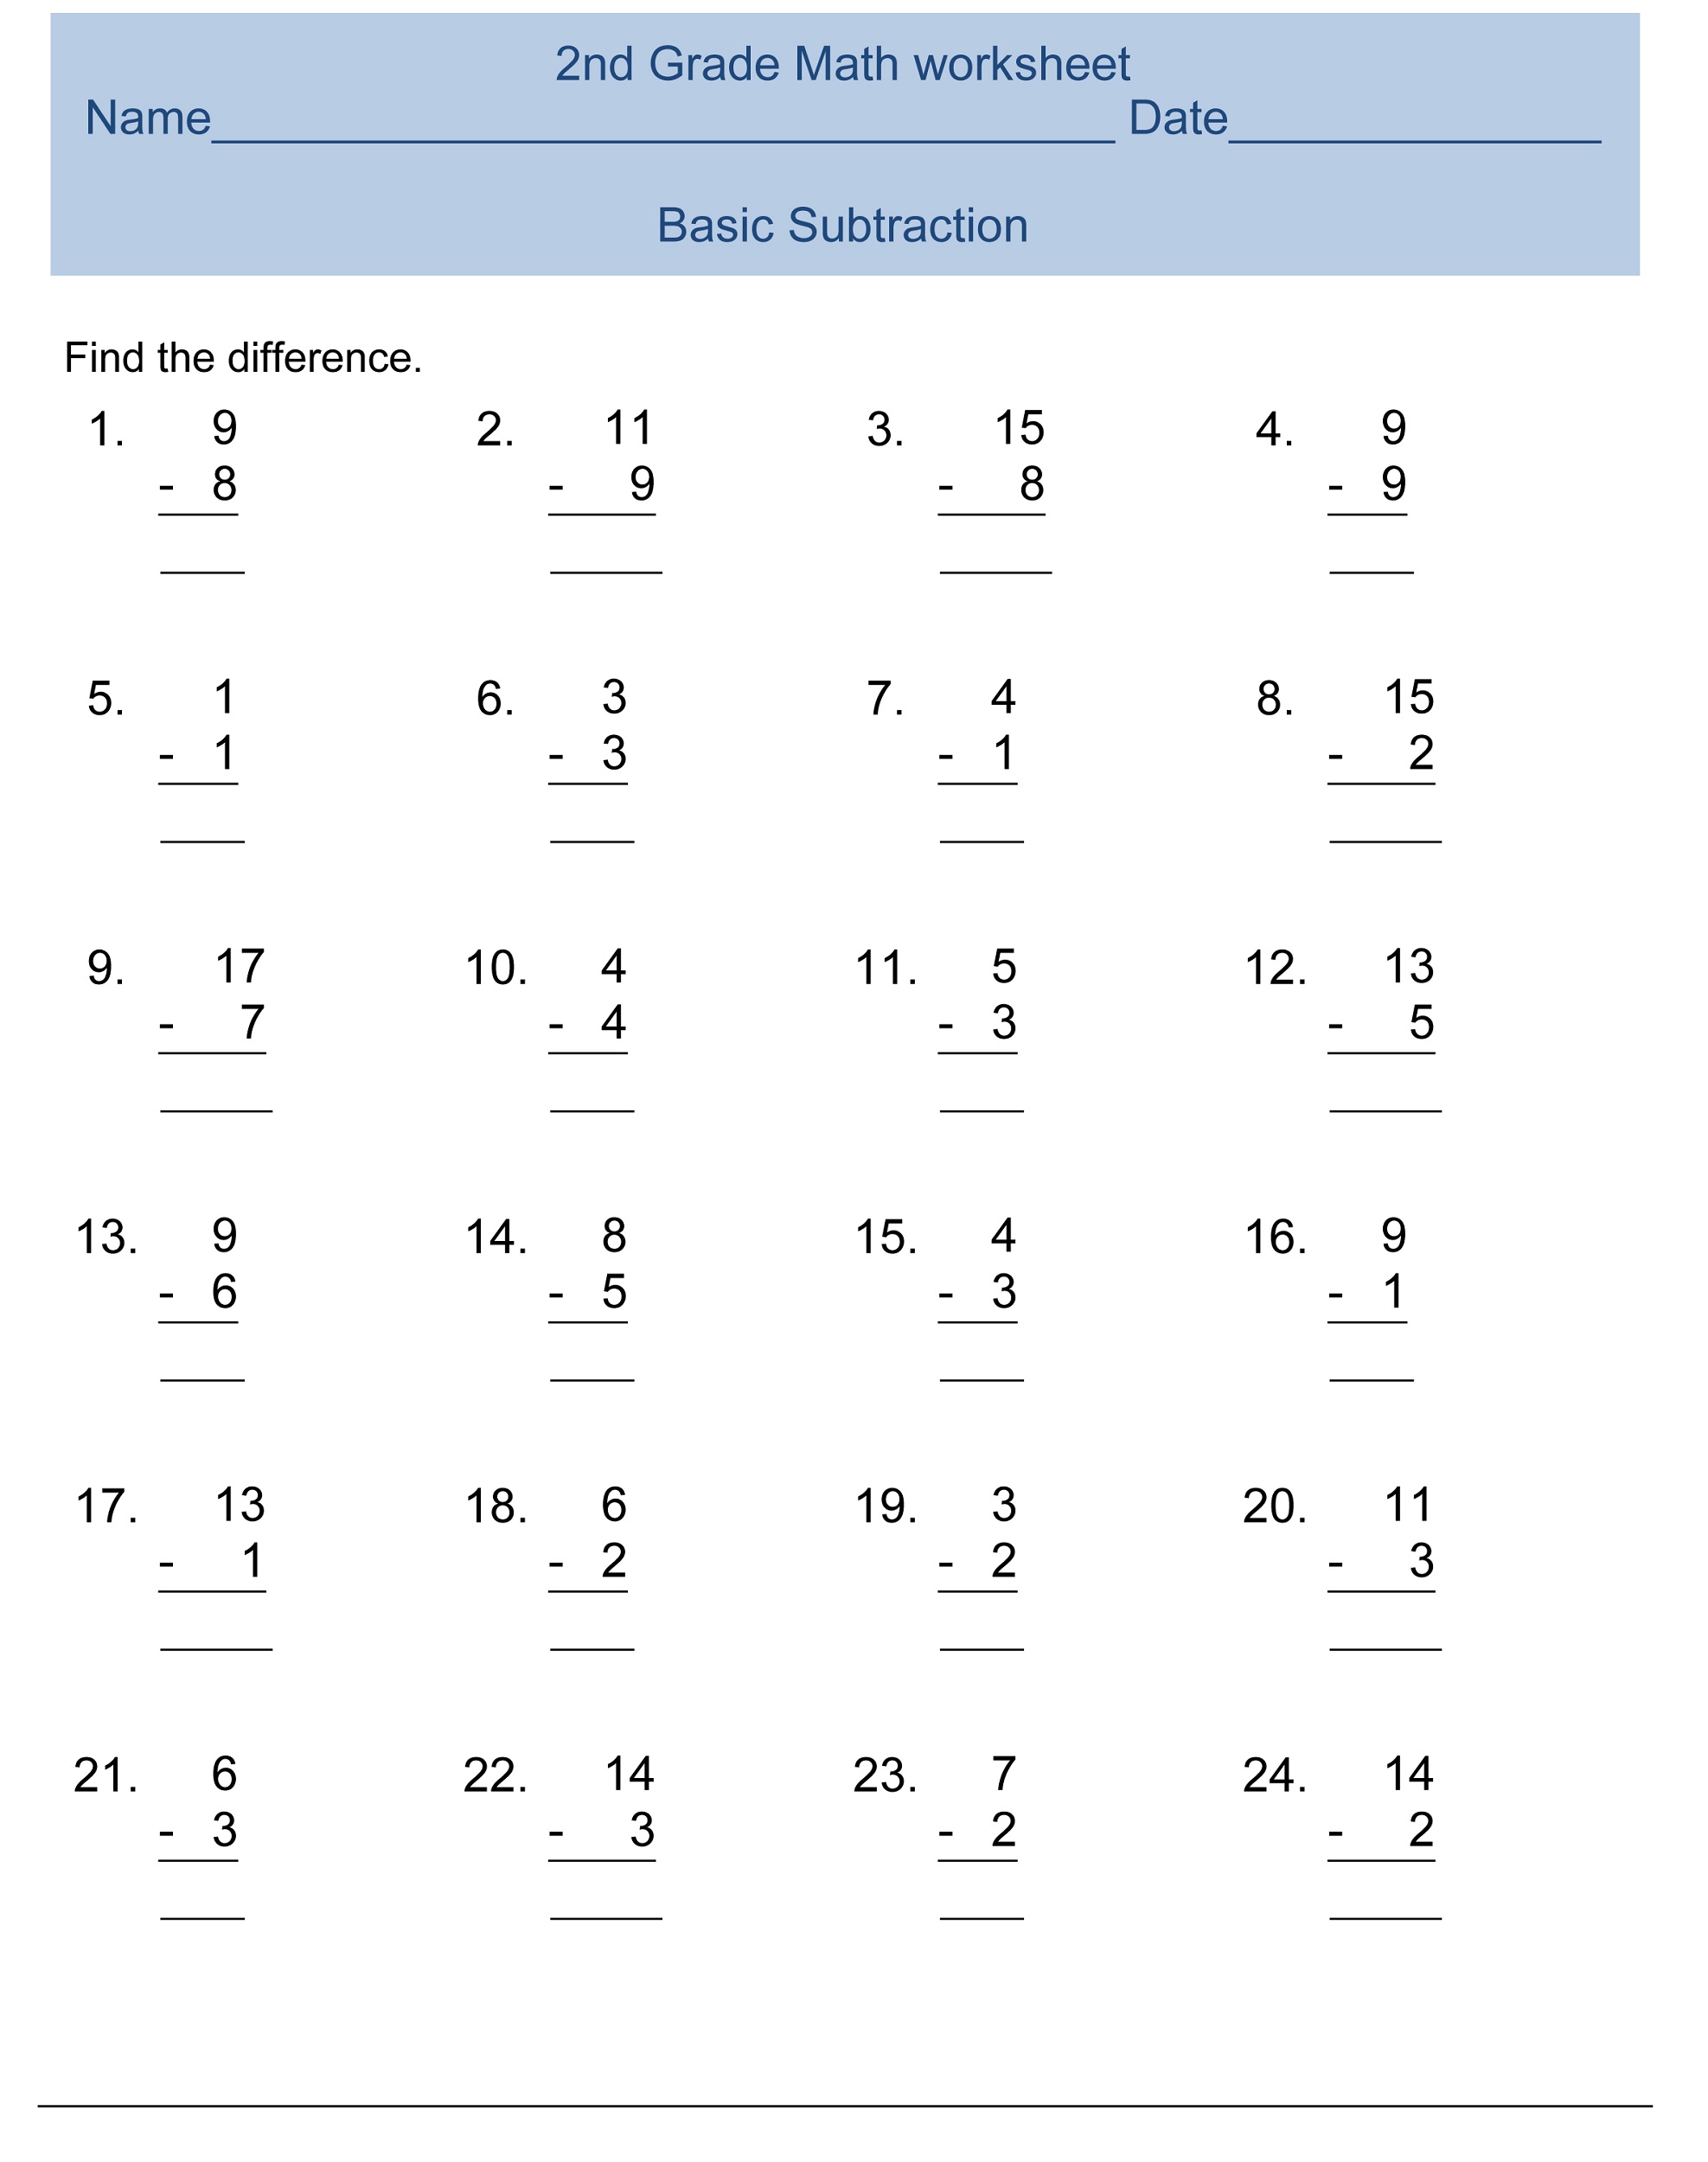 2nd-grade-math-worksheets-pdf-packet-an-essential-tool-for-learning-free-2nd-grade-math